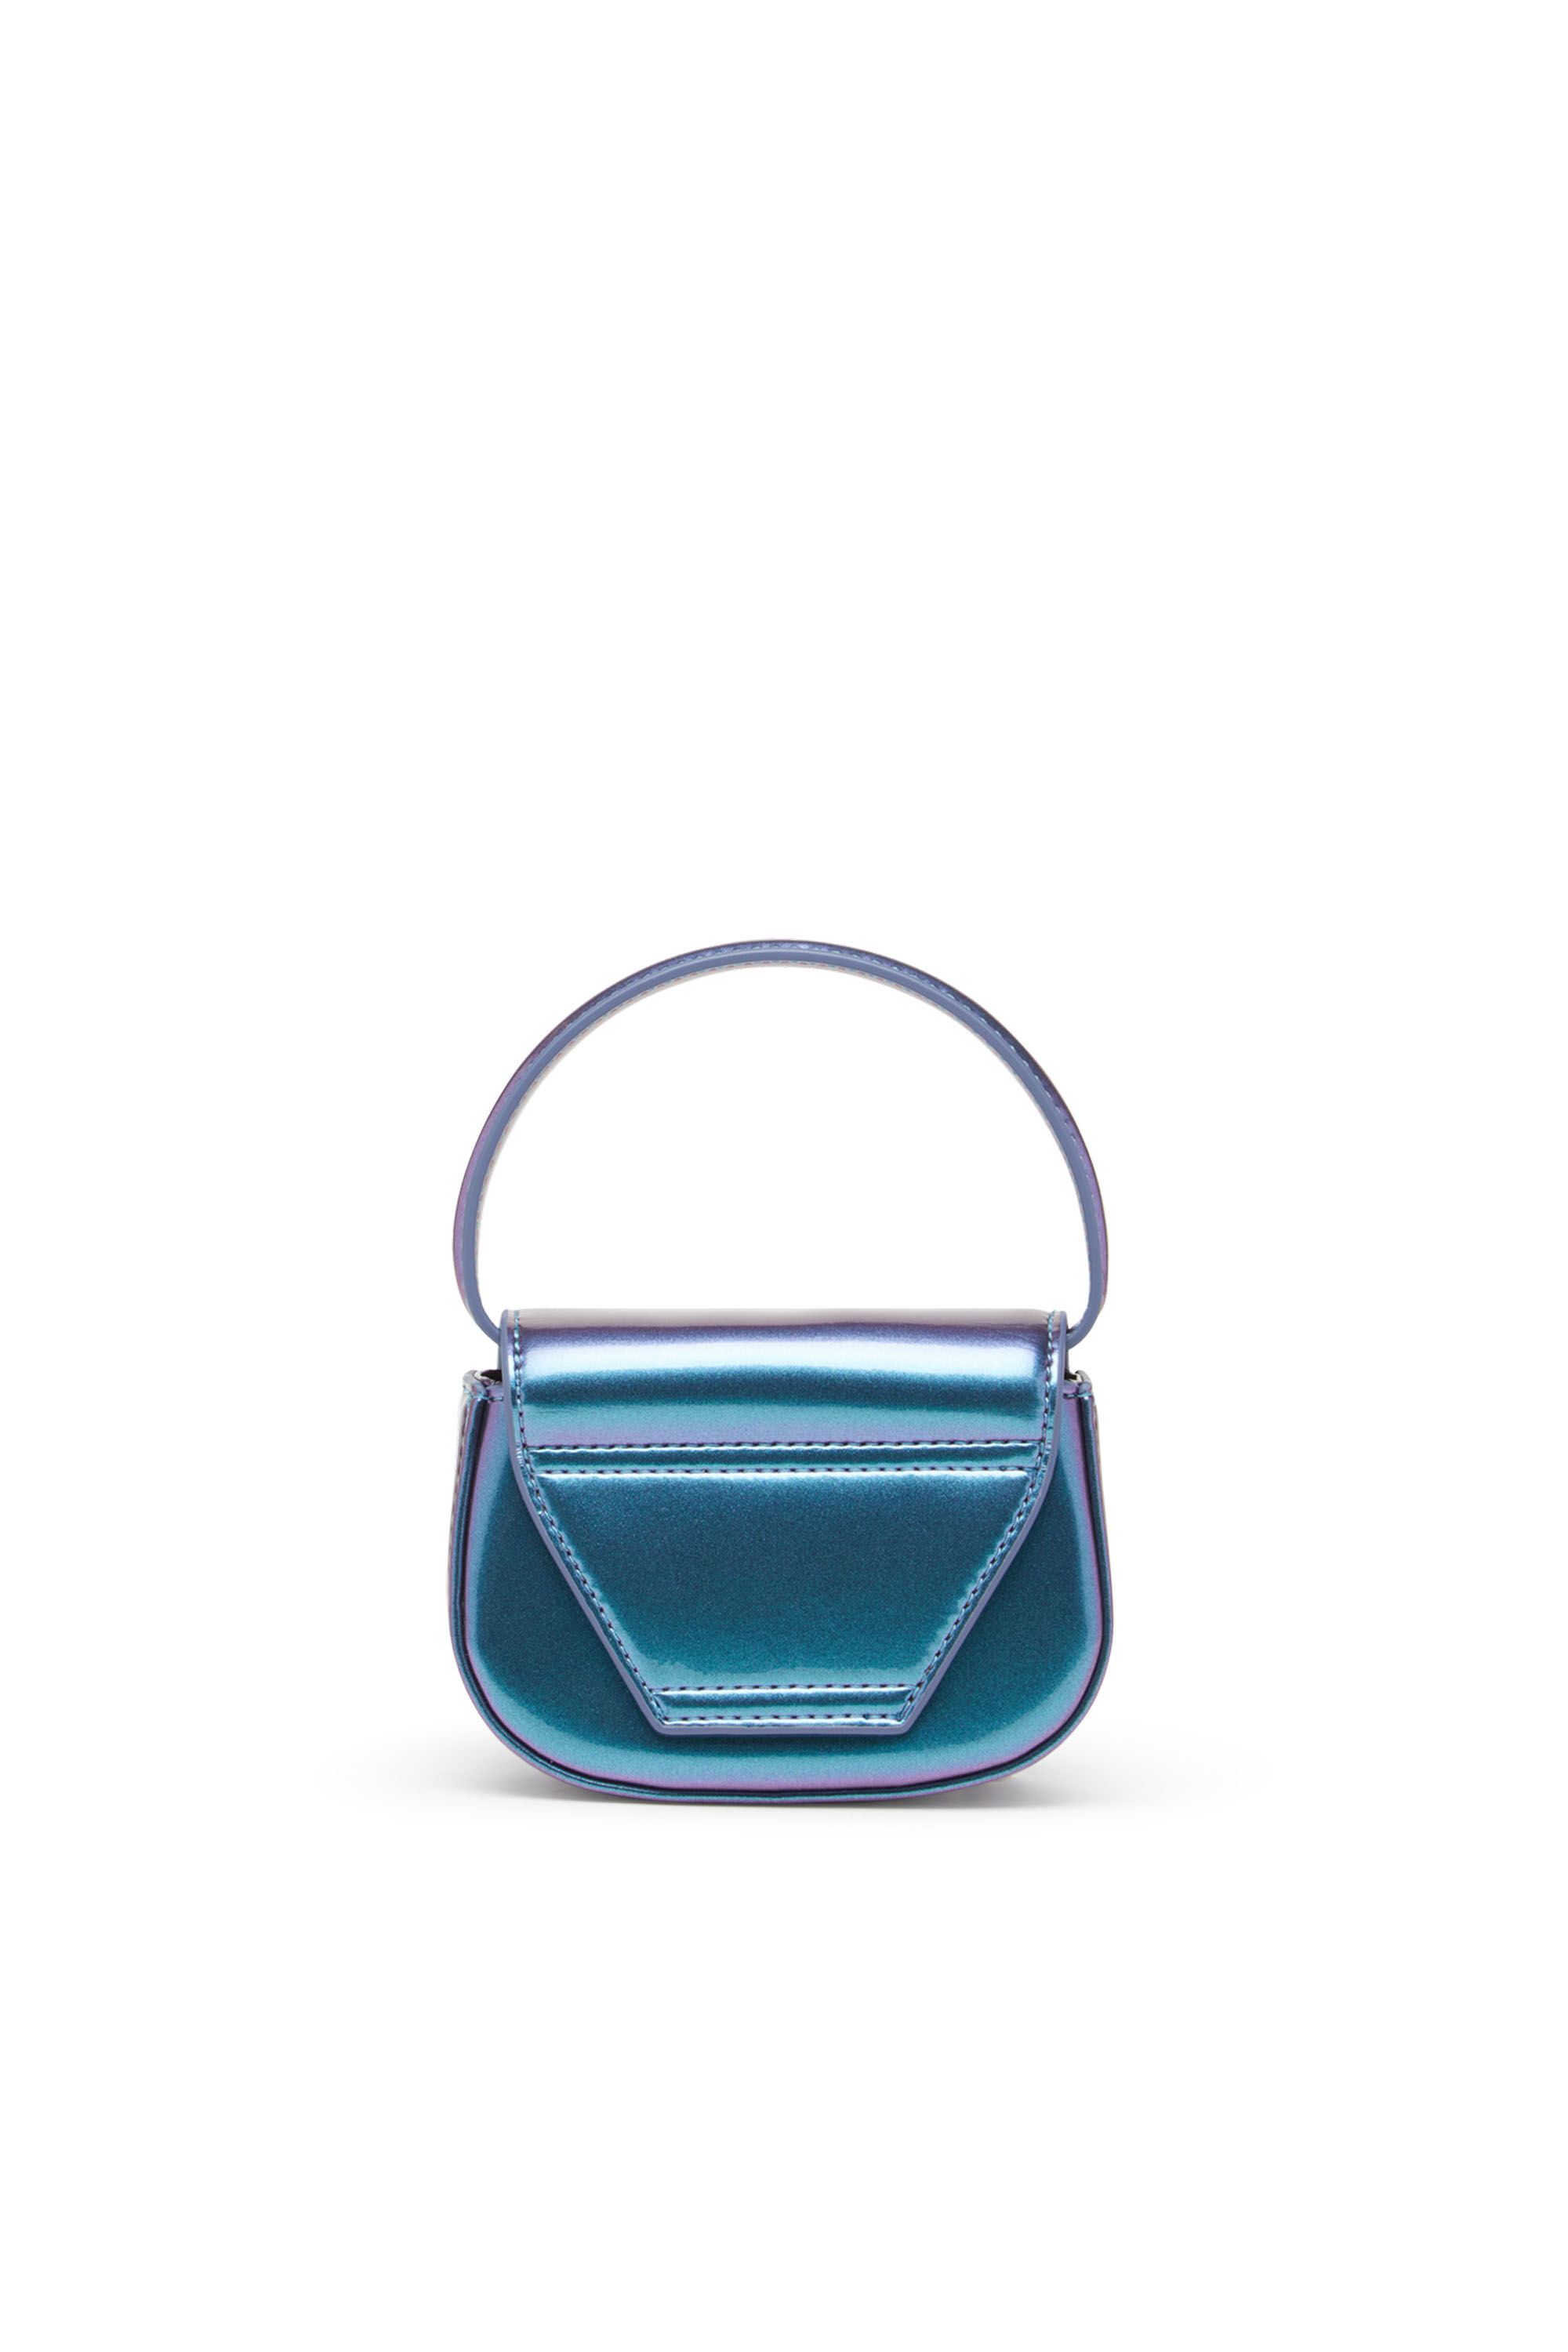 Diesel - 1DR XS, Woman 1DR XS-Iconic iridescent mini bag in Blue - Image 3